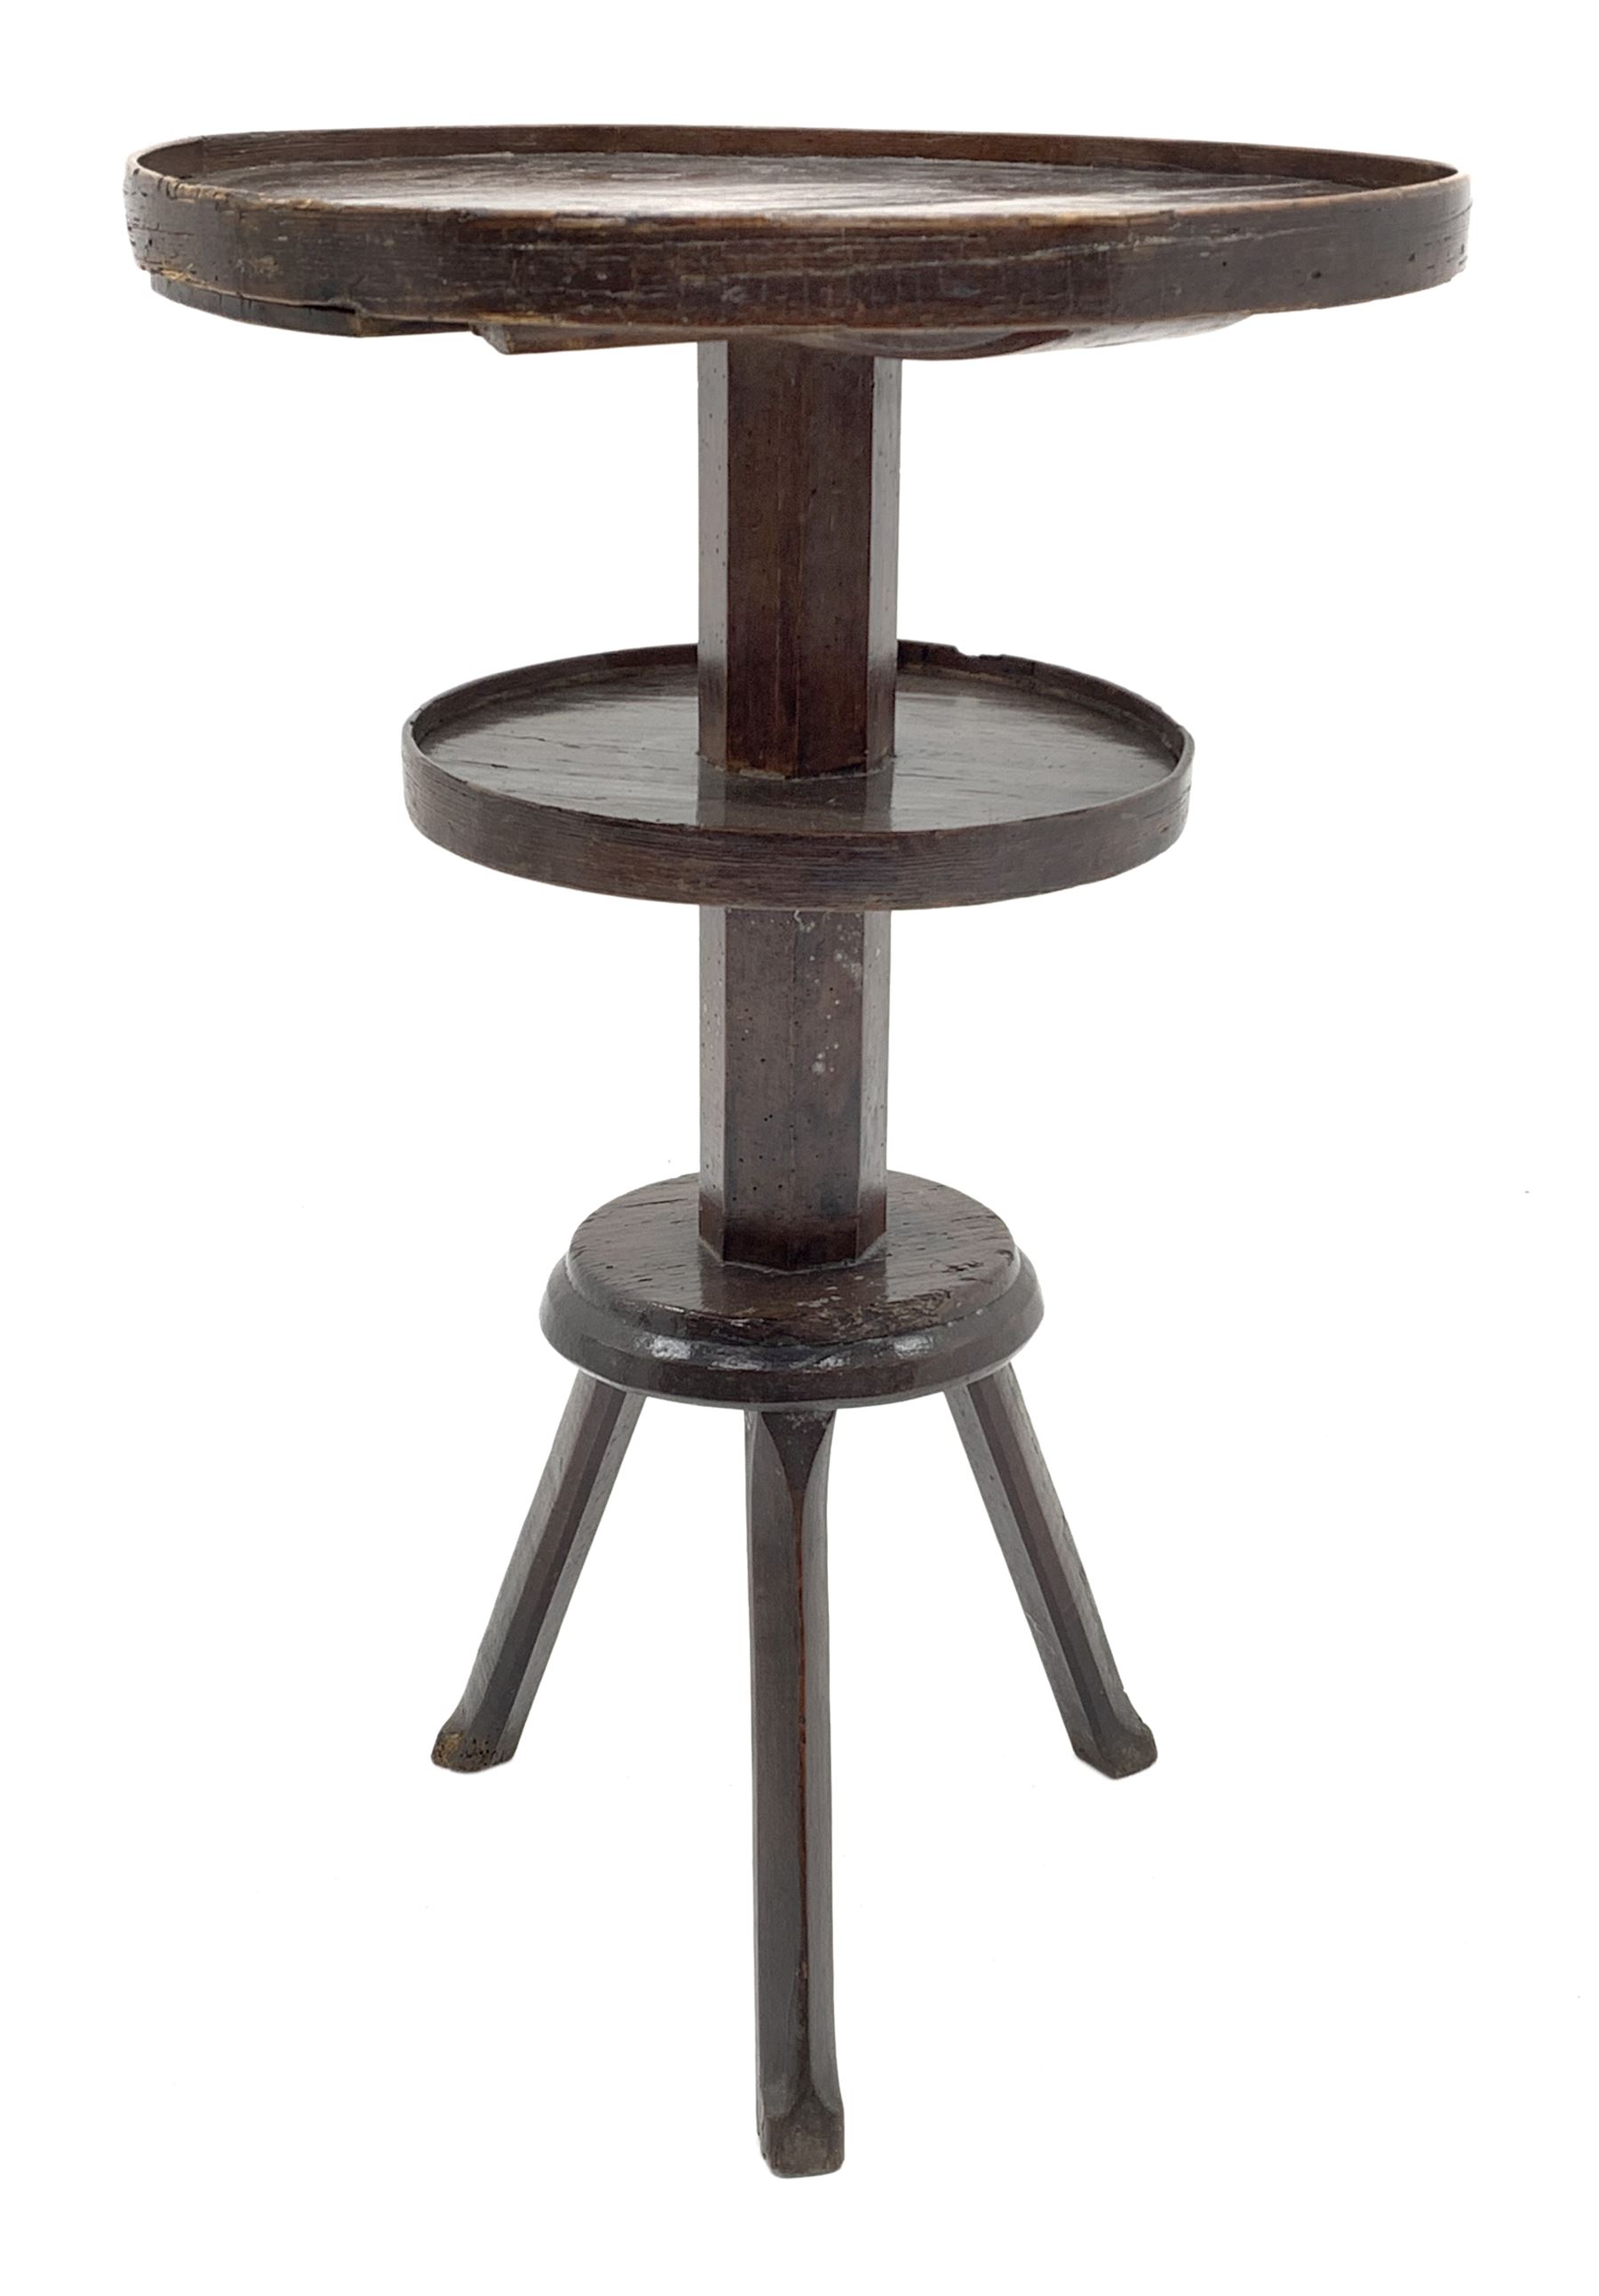 Unusual mid 18th century elm and fruitwood cricket tripod table or candle stand